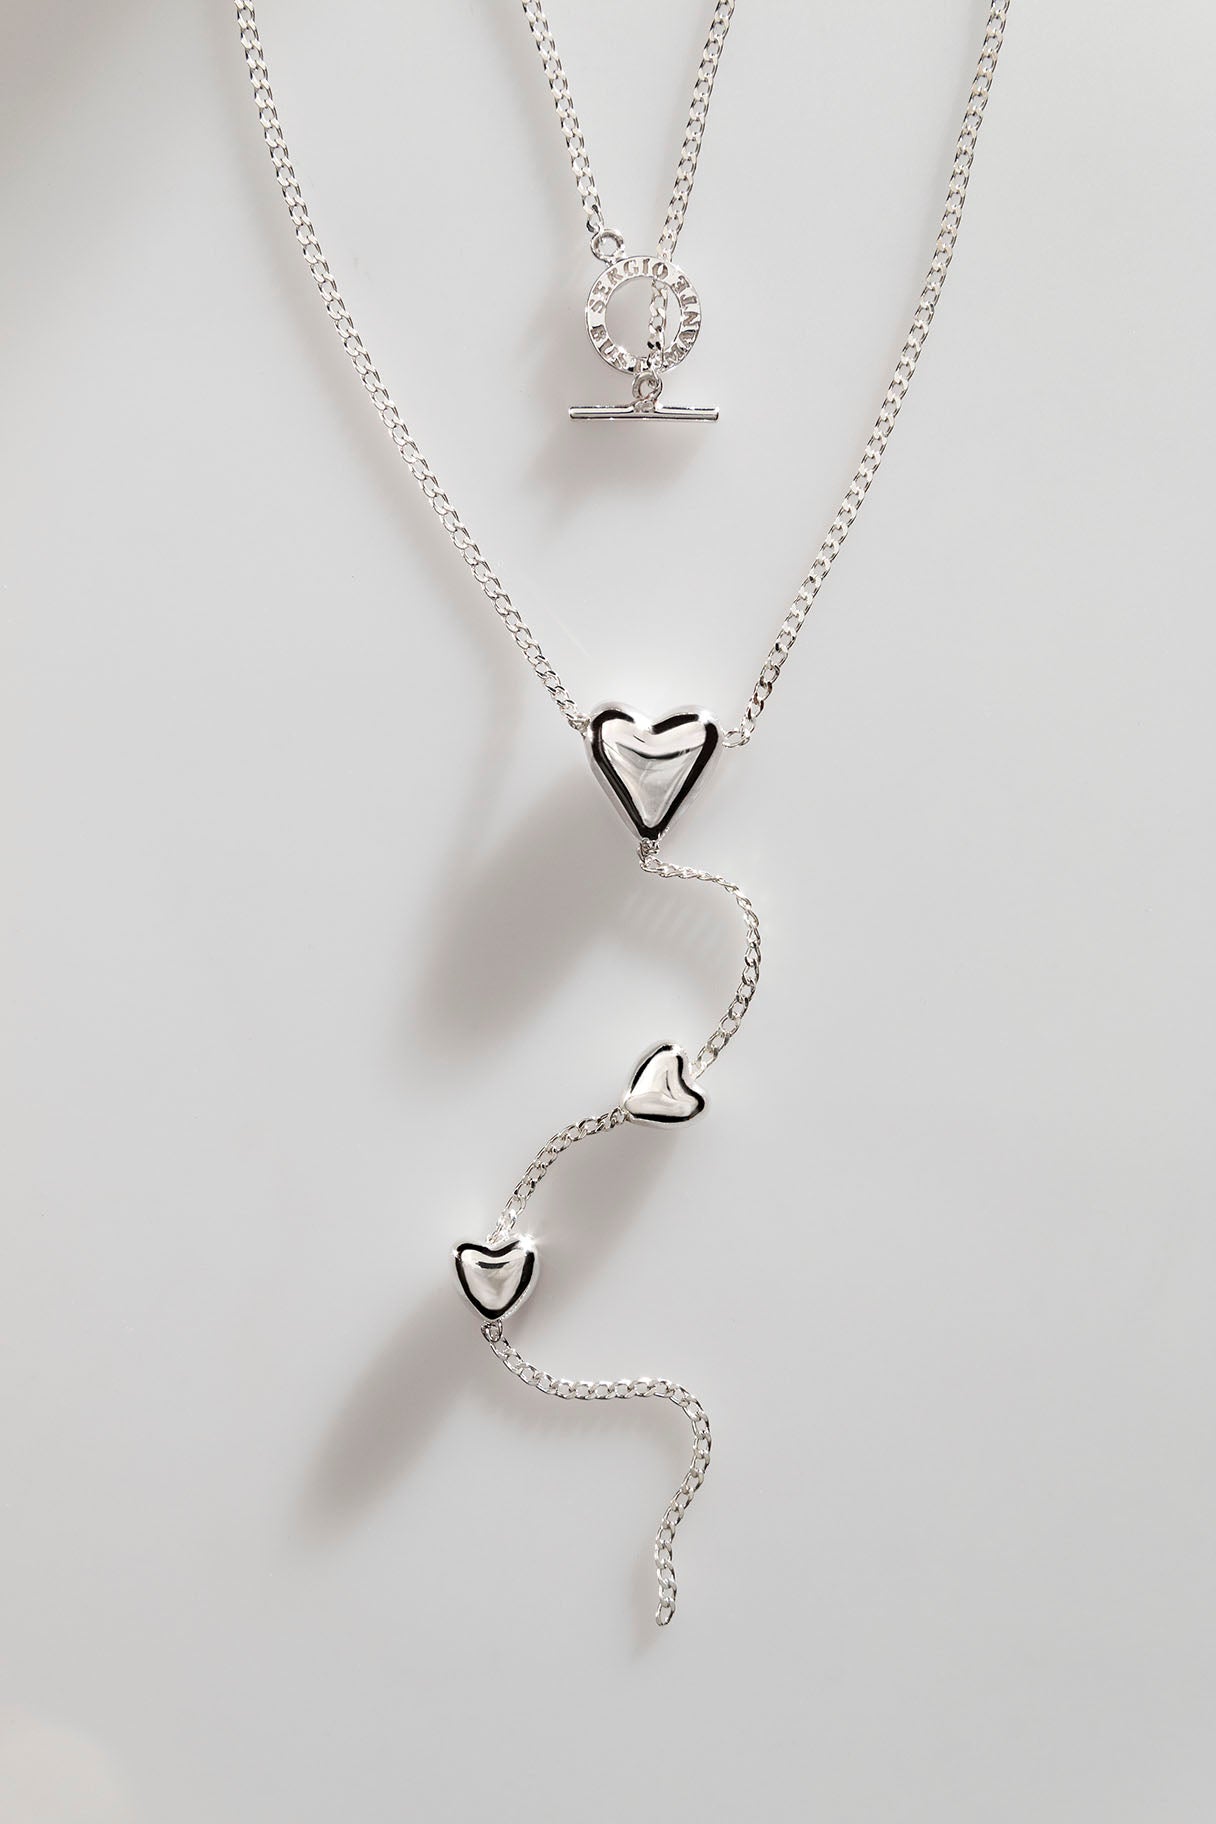 Bows of love necklace